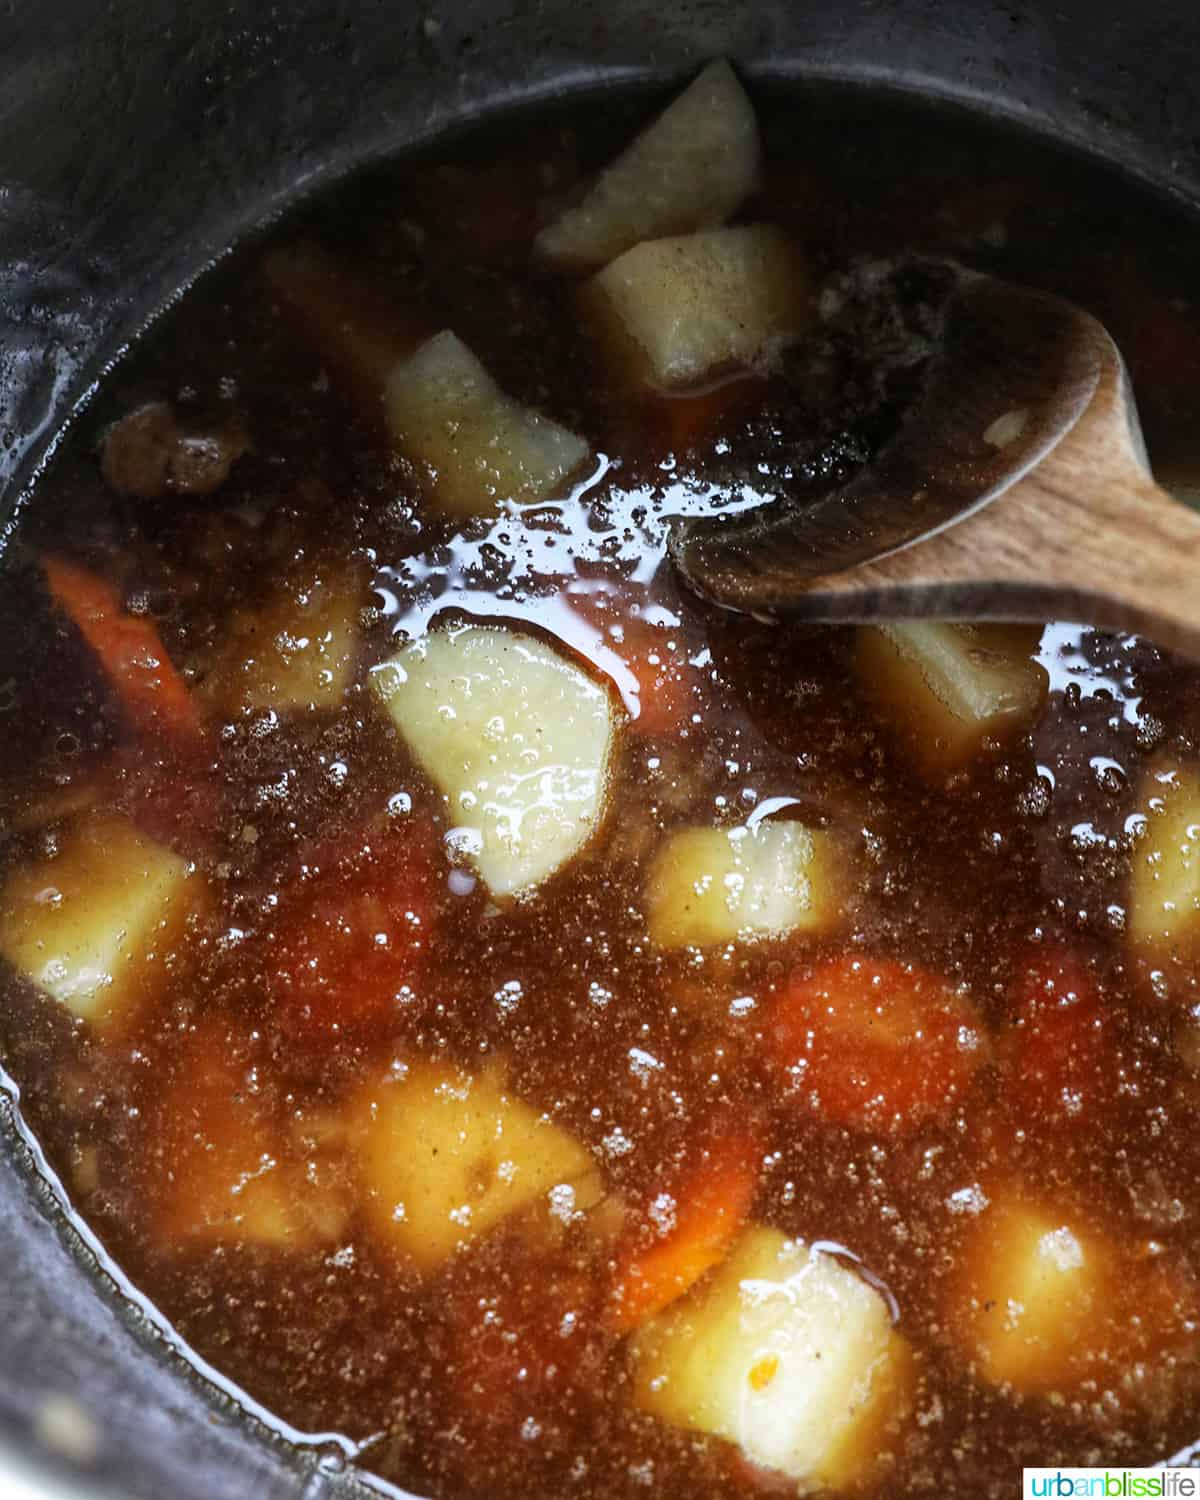 wooden spoon stirring potatoes and carrots in beef broth in an Instant Pot electric pressure cooker.